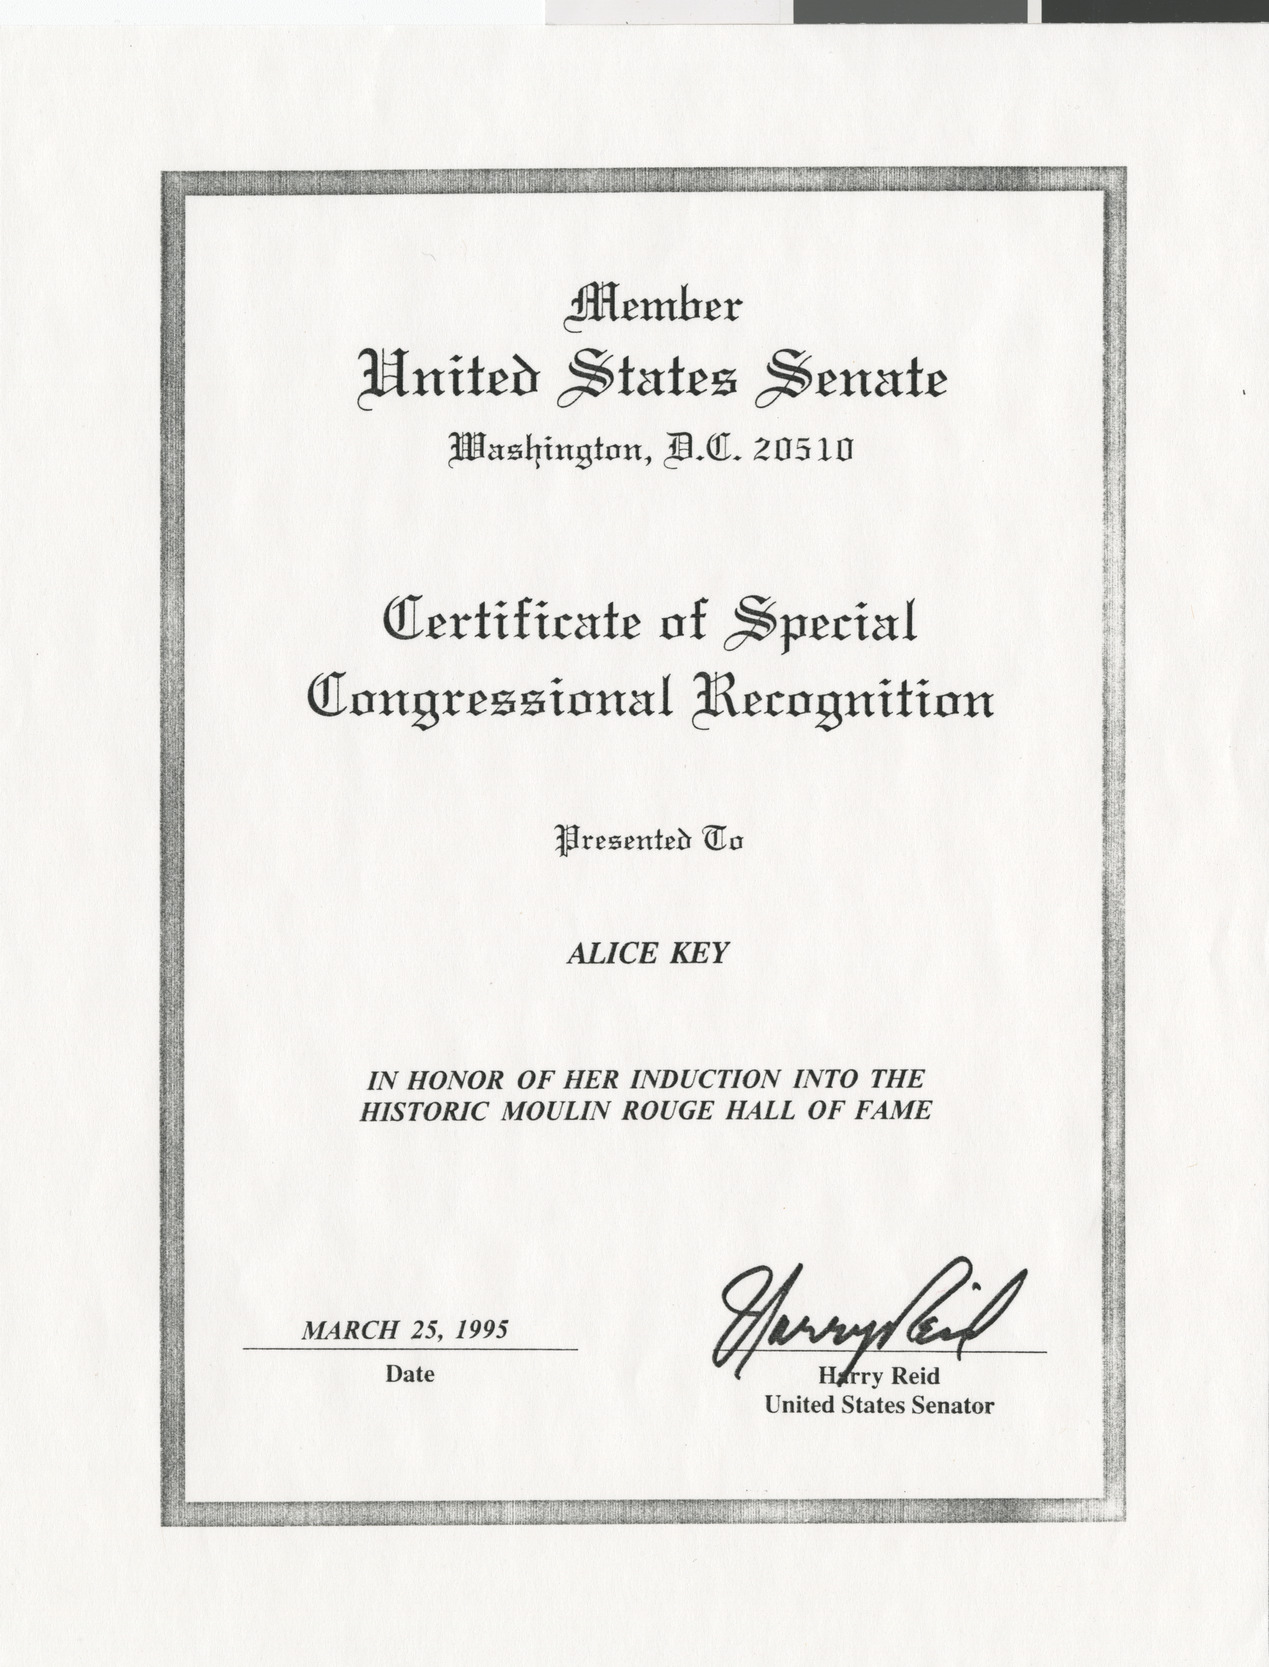 Photocopy of Certificate of Special Congressional Recognition for Alice Key for her induction into the Historic Moulin Rouge Hall of Fame, 1995 (see also Box 1 Folder 13)